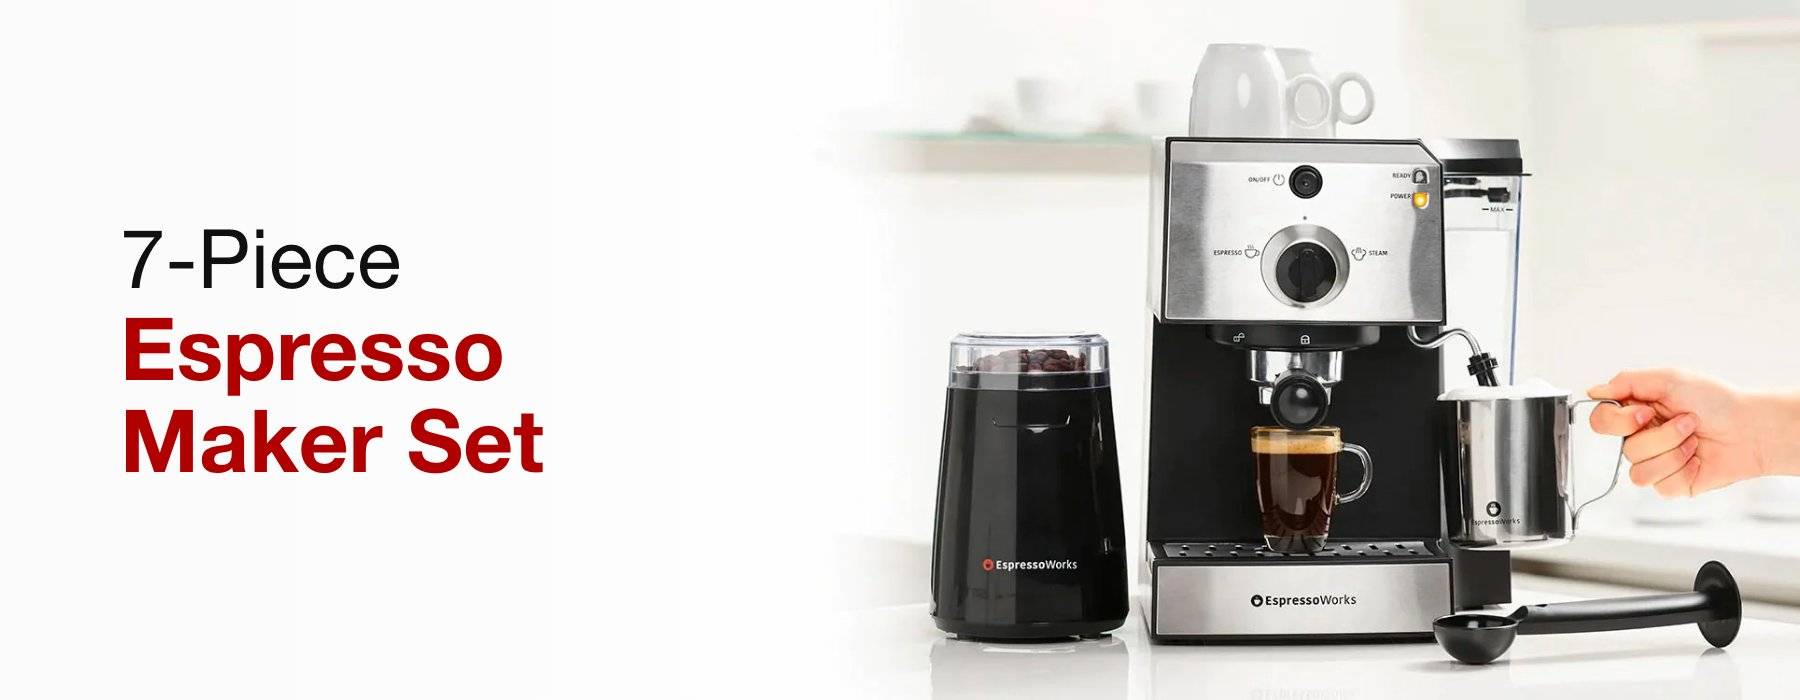 Frequently Asked Questions about the EspressoWorks 7-Piece Espresso Maker Set